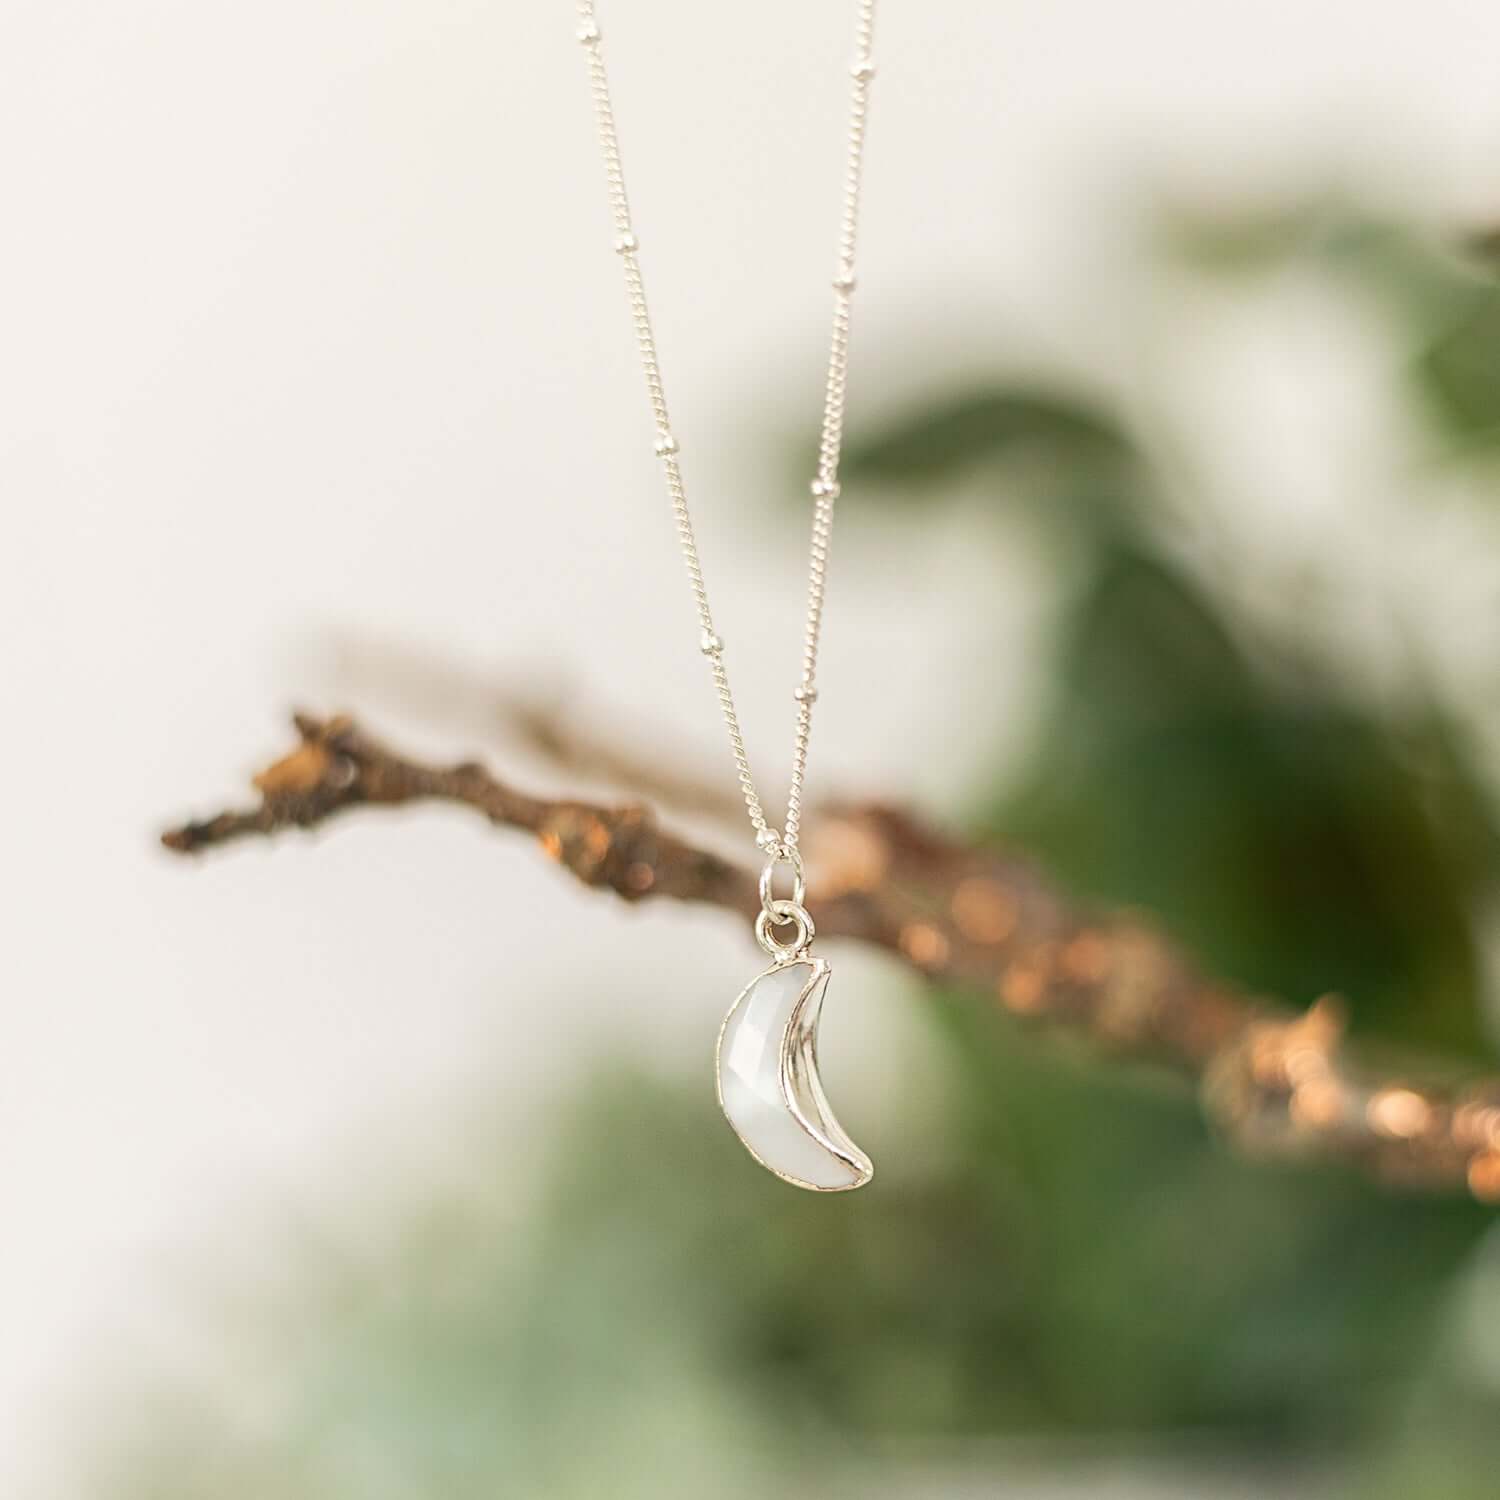  A delicate womens sterling silver necklace with a small crescent moon pendant hangs from a thin beaded chain. The background is softly blurred, featuring green foliage, creating an elegant and serene setting for the jewellery